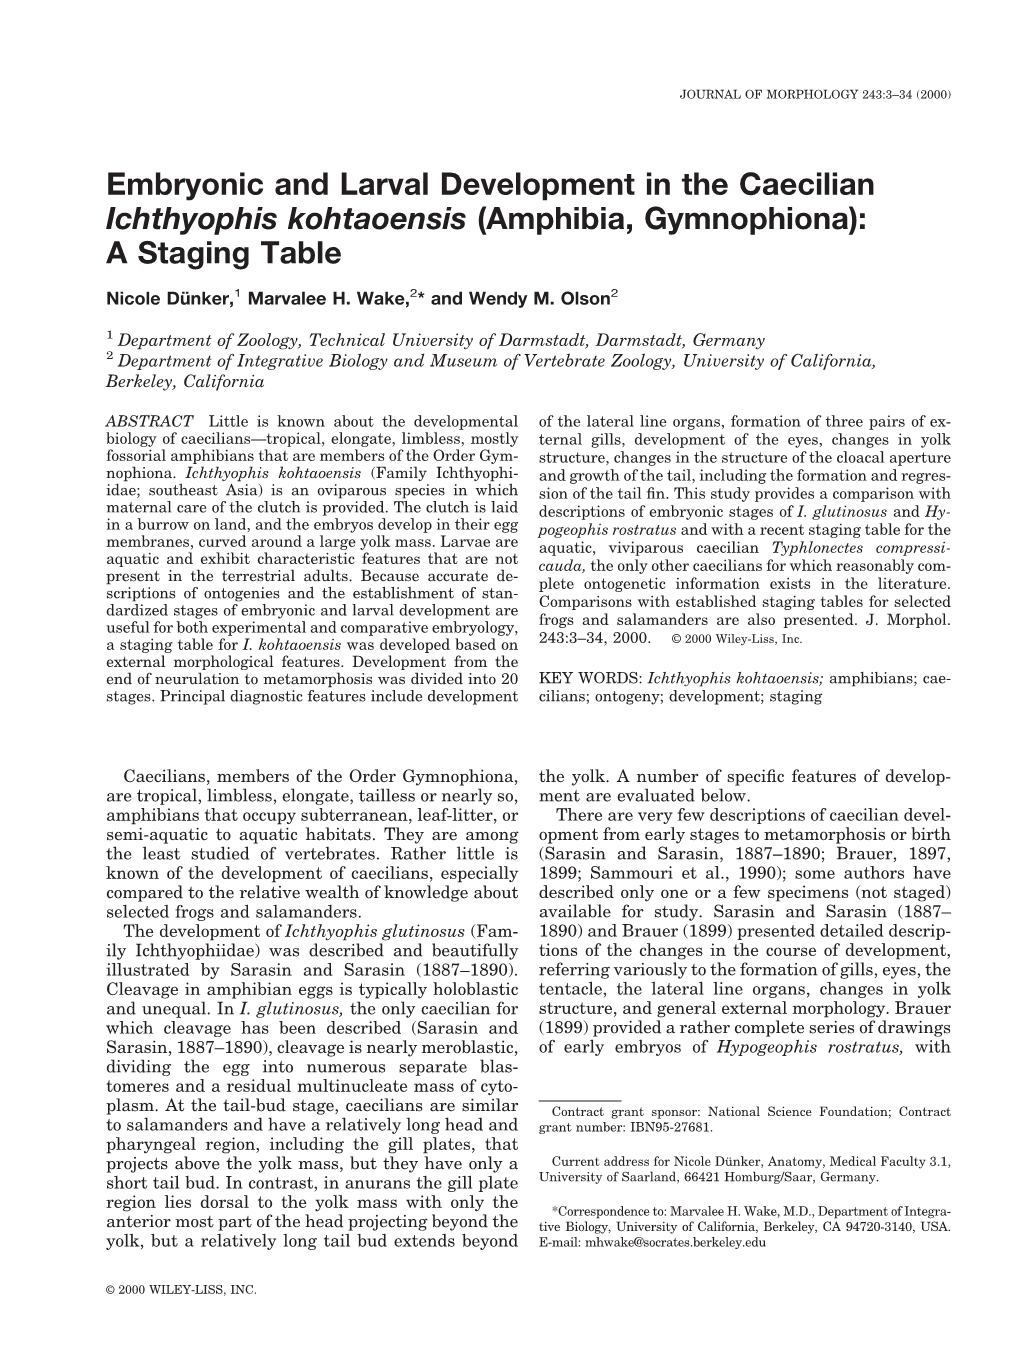 Embryonic and Larval Development in the Caecilian Ichthyophis Kohtaoensis (Amphibia, Gymnophiona): a Staging Table